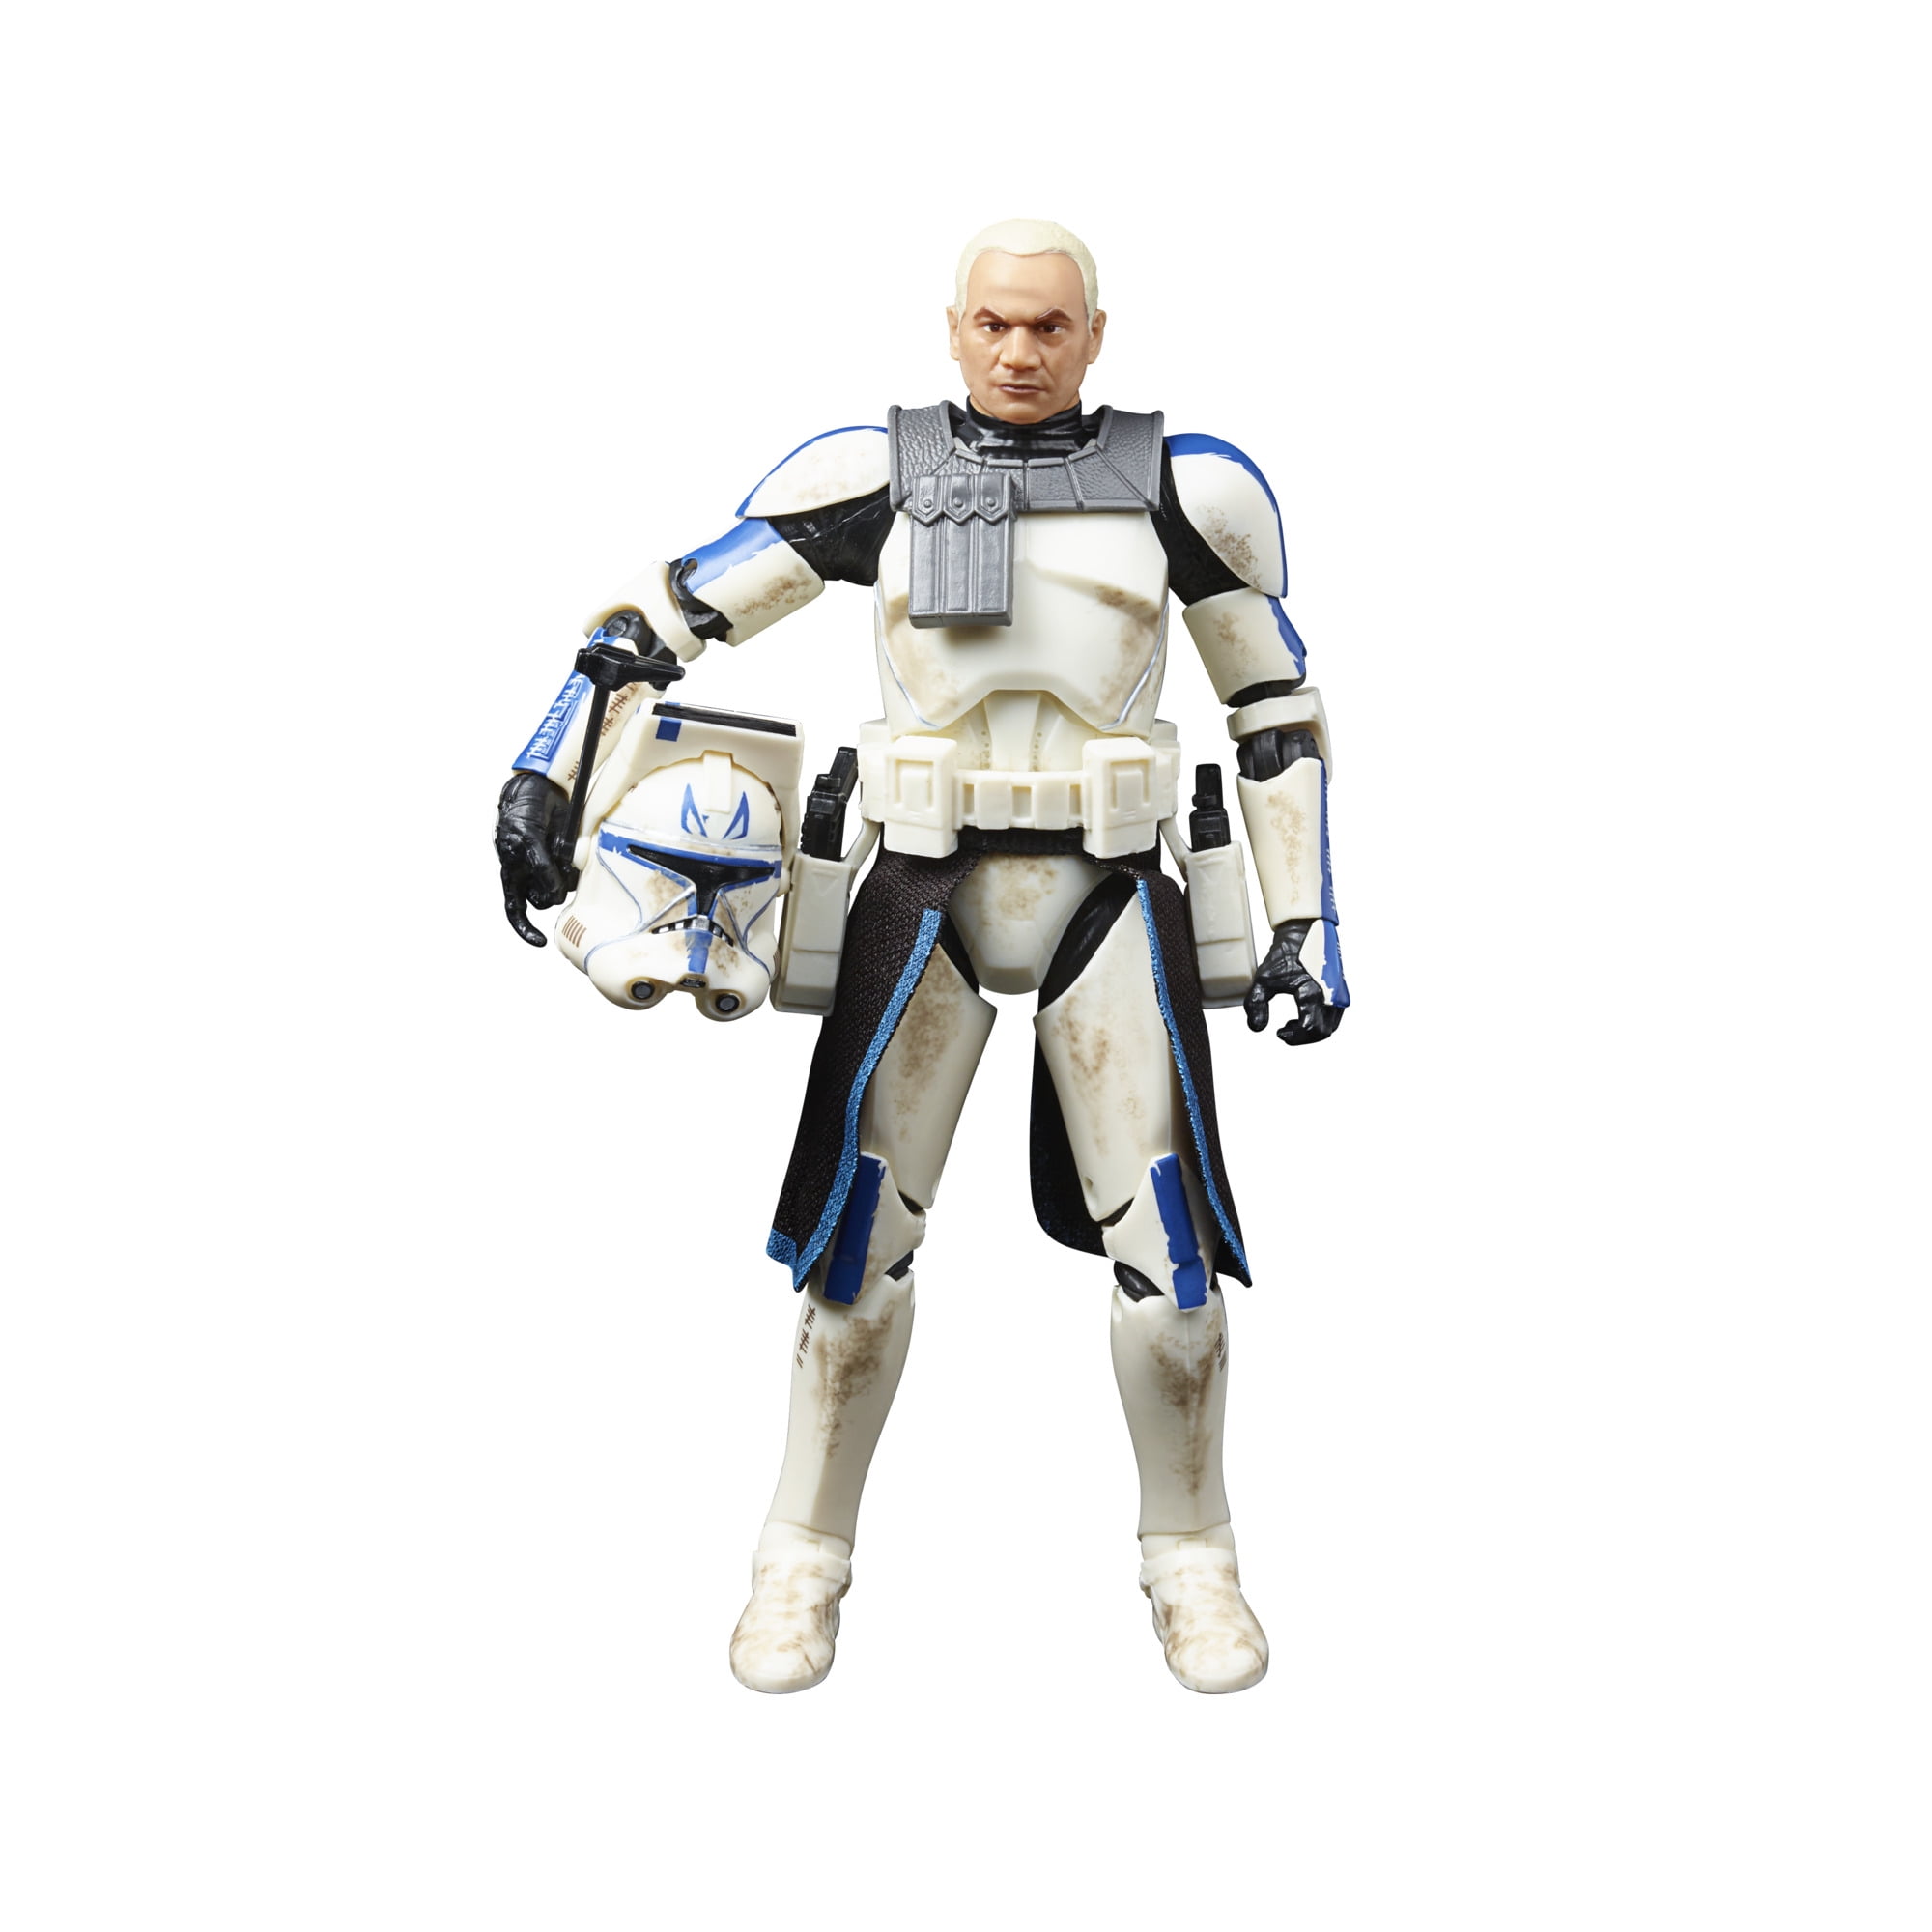 Hasbro Star Wars The Clone Wars Captain Rex Action Figure for sale online